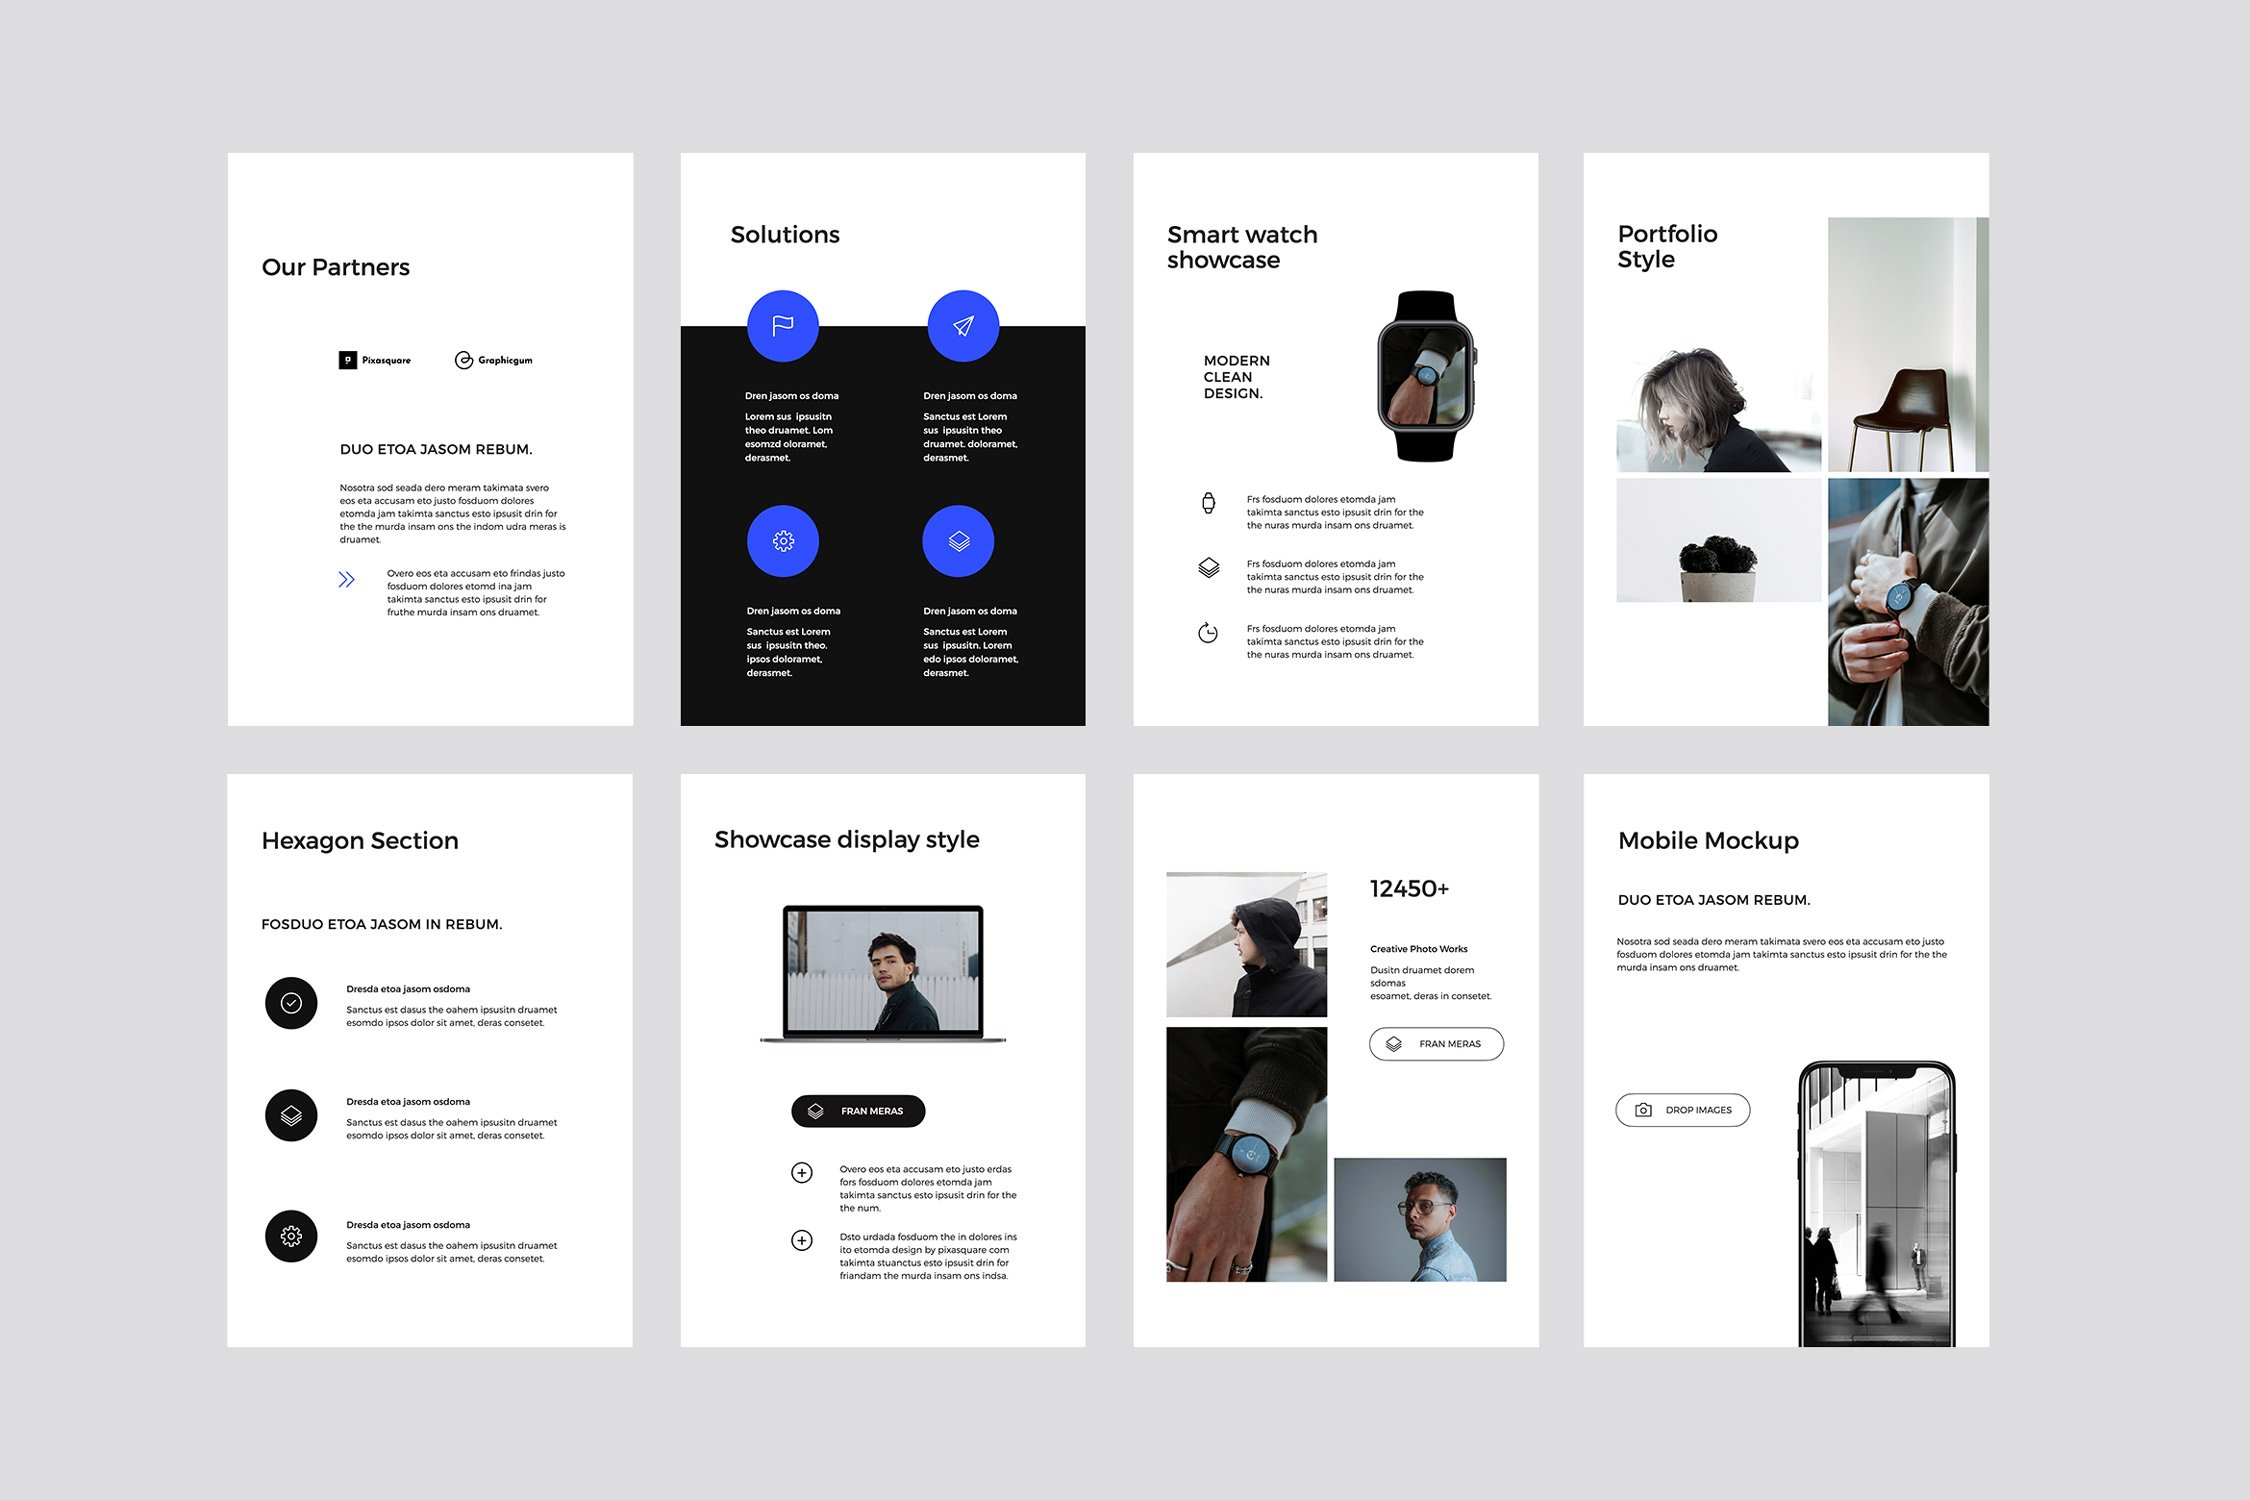 Dark sections with bright blue infographics.